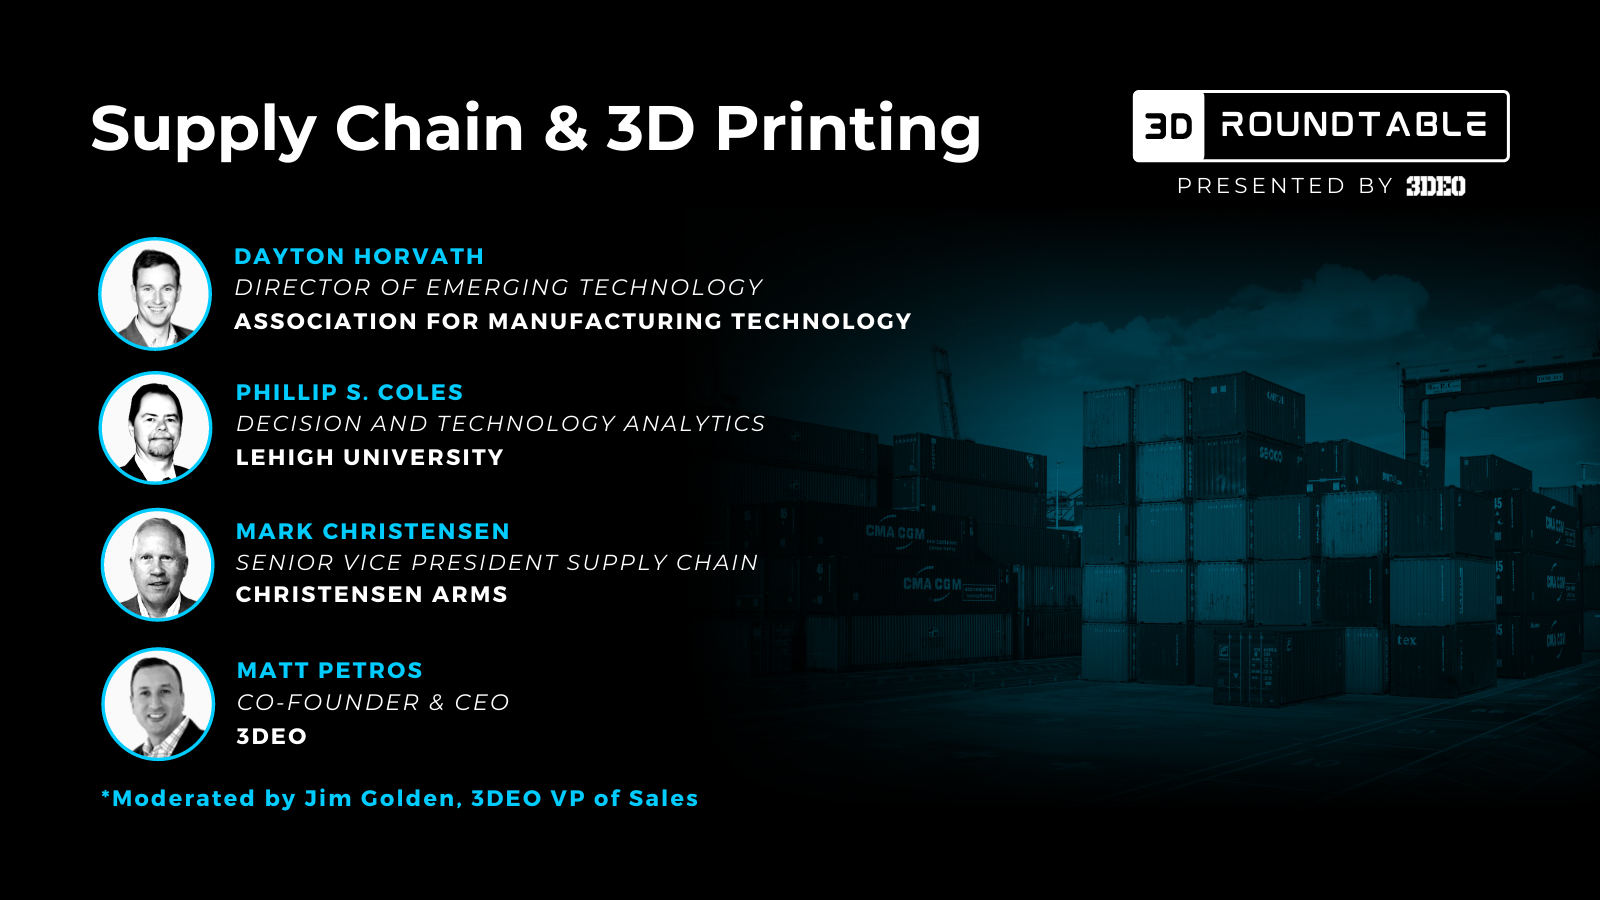 3D Roundtable: Supply Chain and 3D Printing